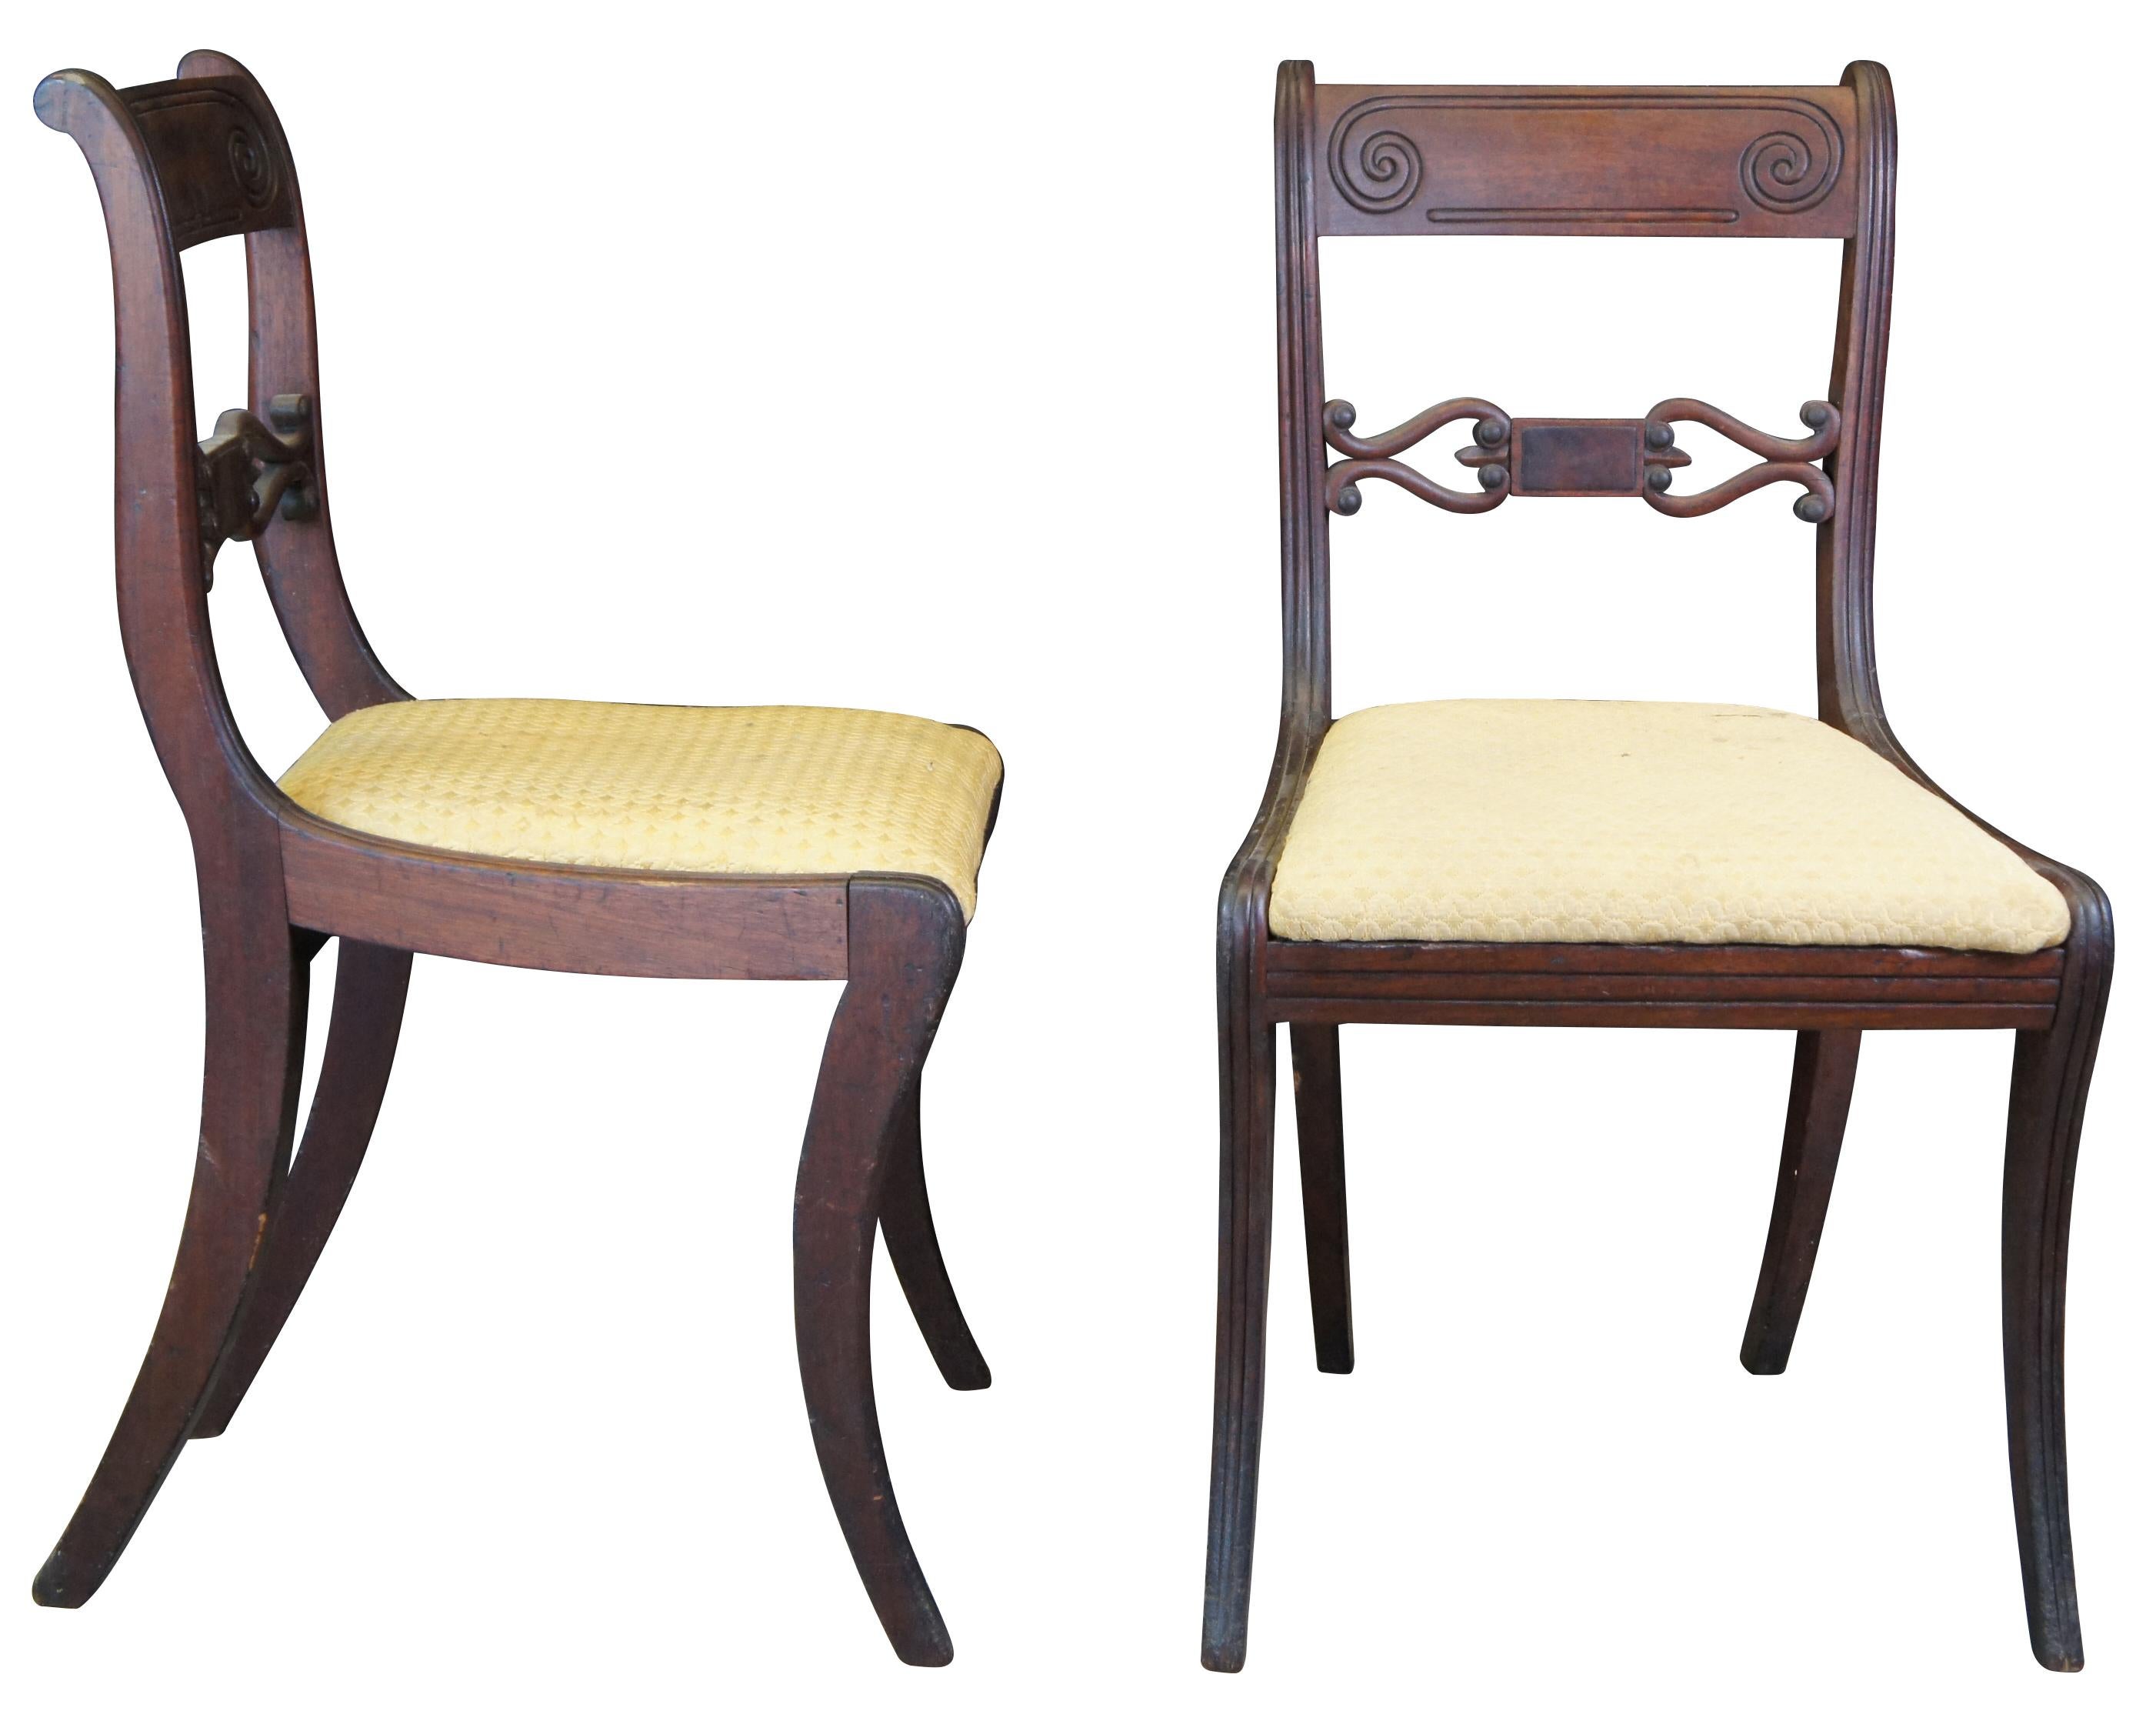 Two antique Duncan Phyfe Klismos style side accent dining chairs. Made of mahogany featuring open back with carved and fluted accents. Measure: 33